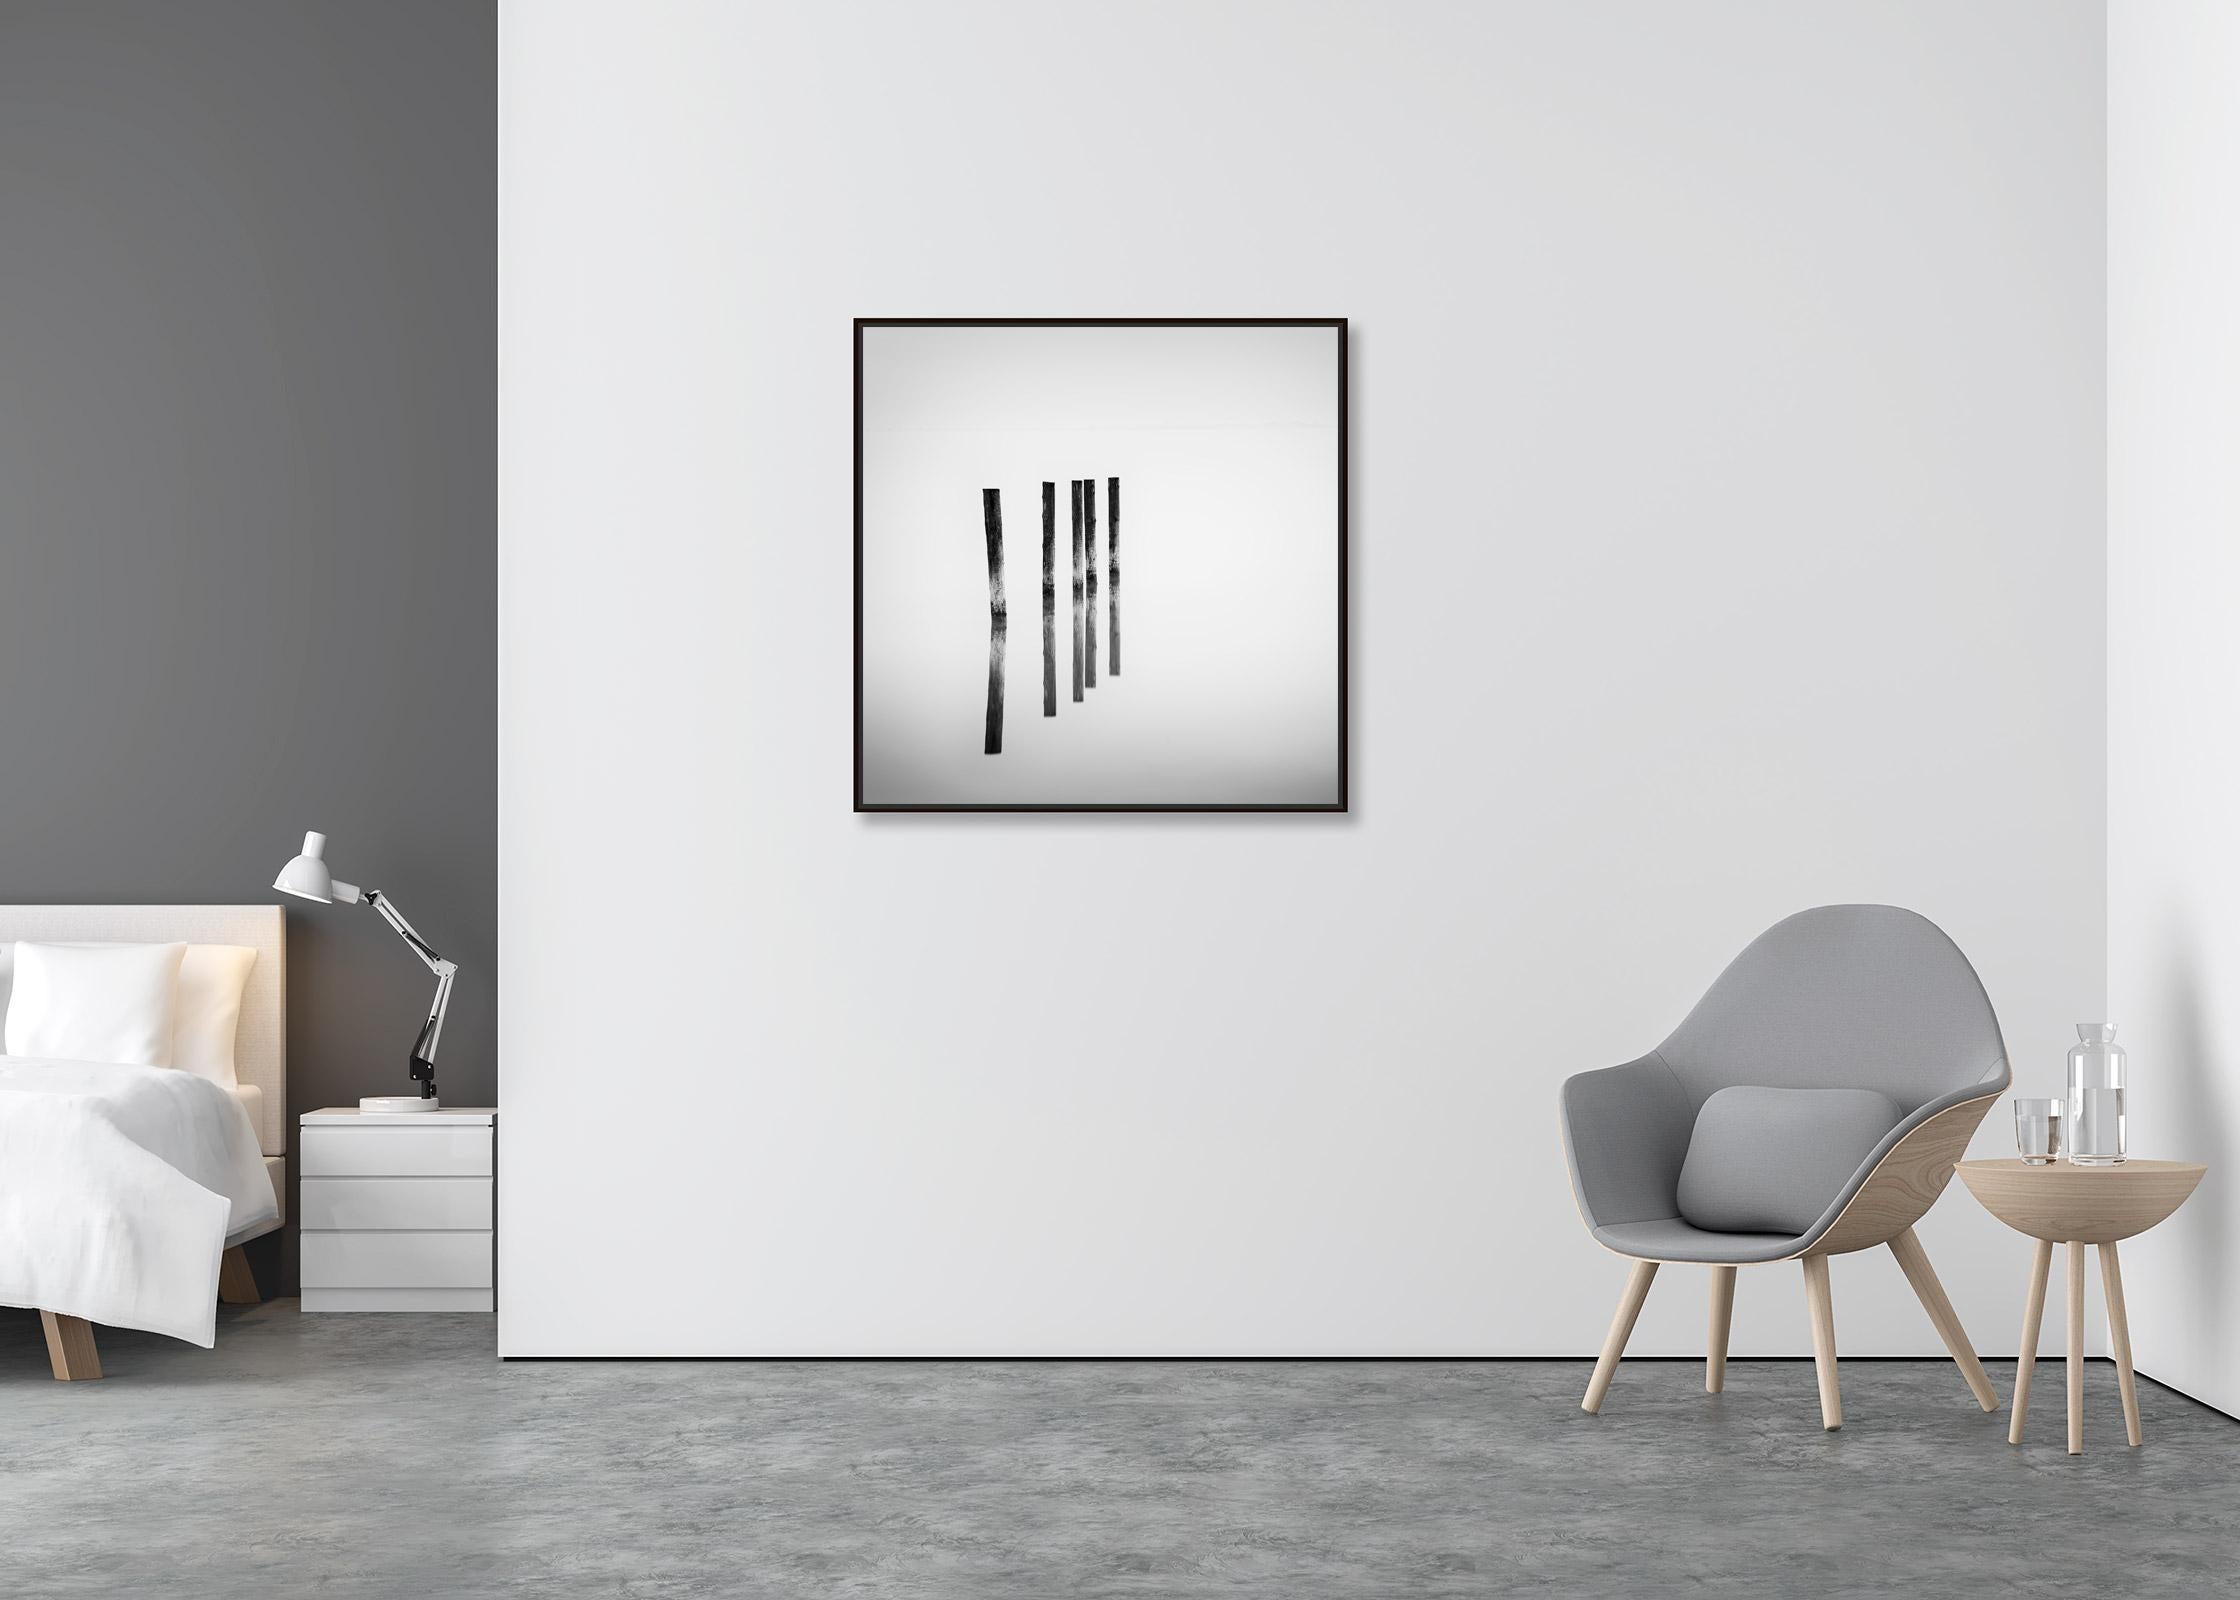 Five wooden Posts in the Lake, black and white, long exposure fineart waterscape - Contemporary Photograph by Gerald Berghammer